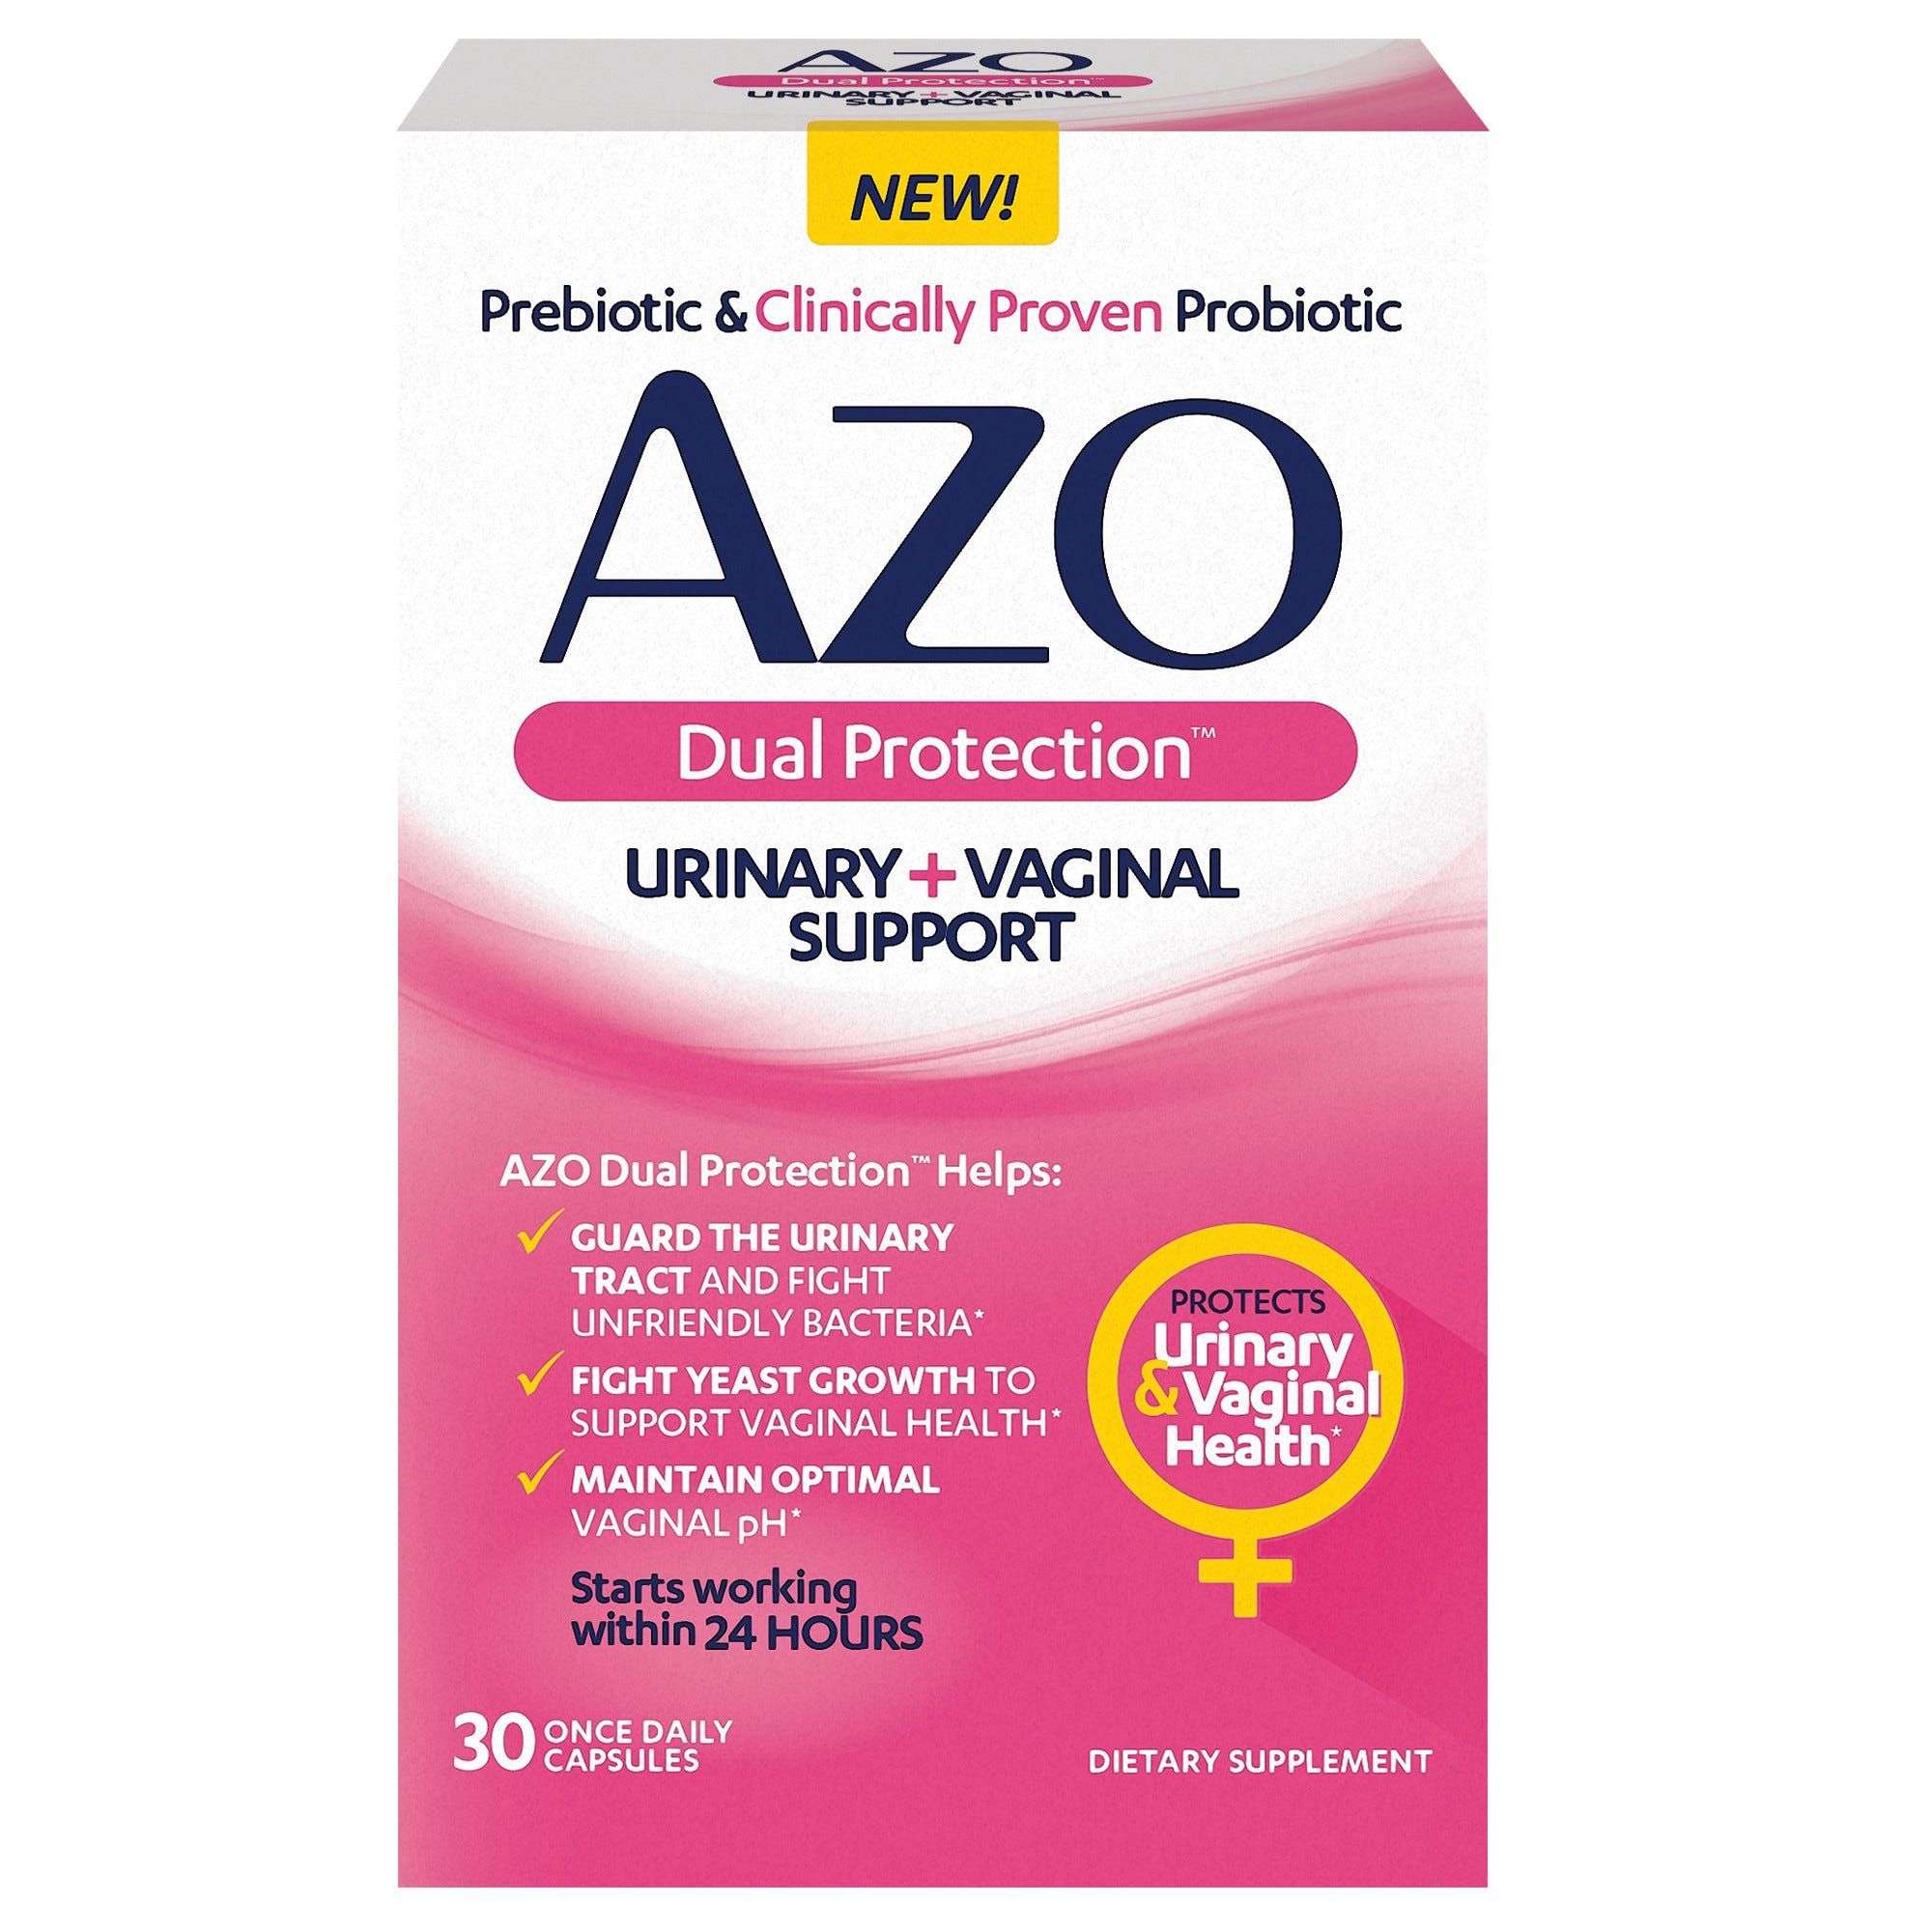 How Long Does It Take For Azo To Work For A Uti